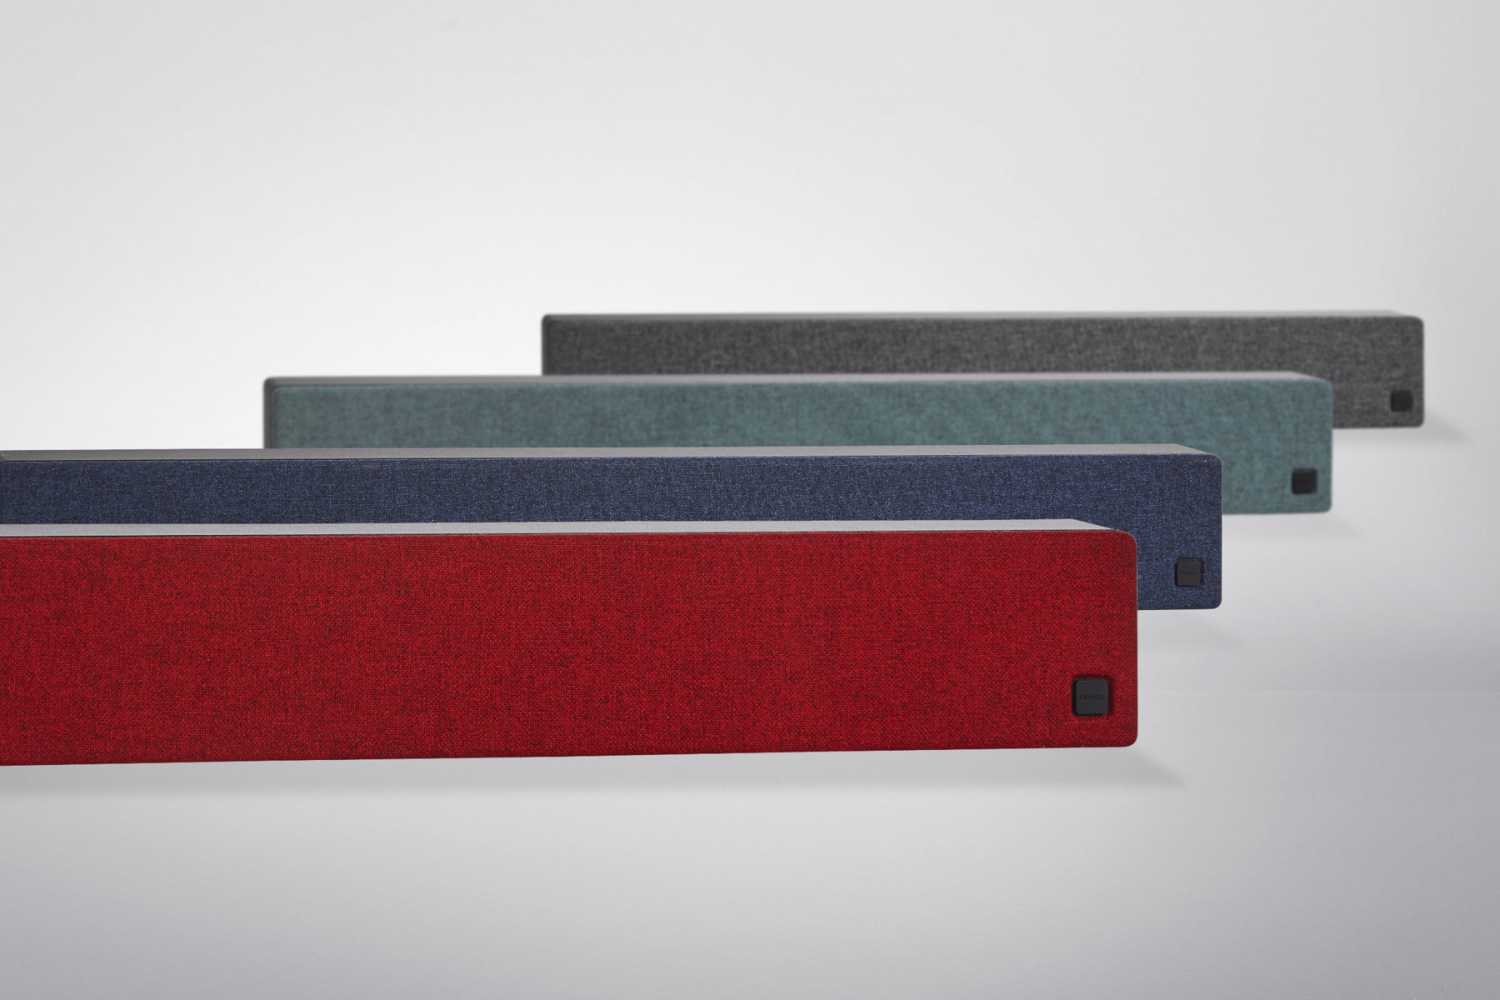 the Neets Sound Bar cover will now be available in grey, blue, red, and green